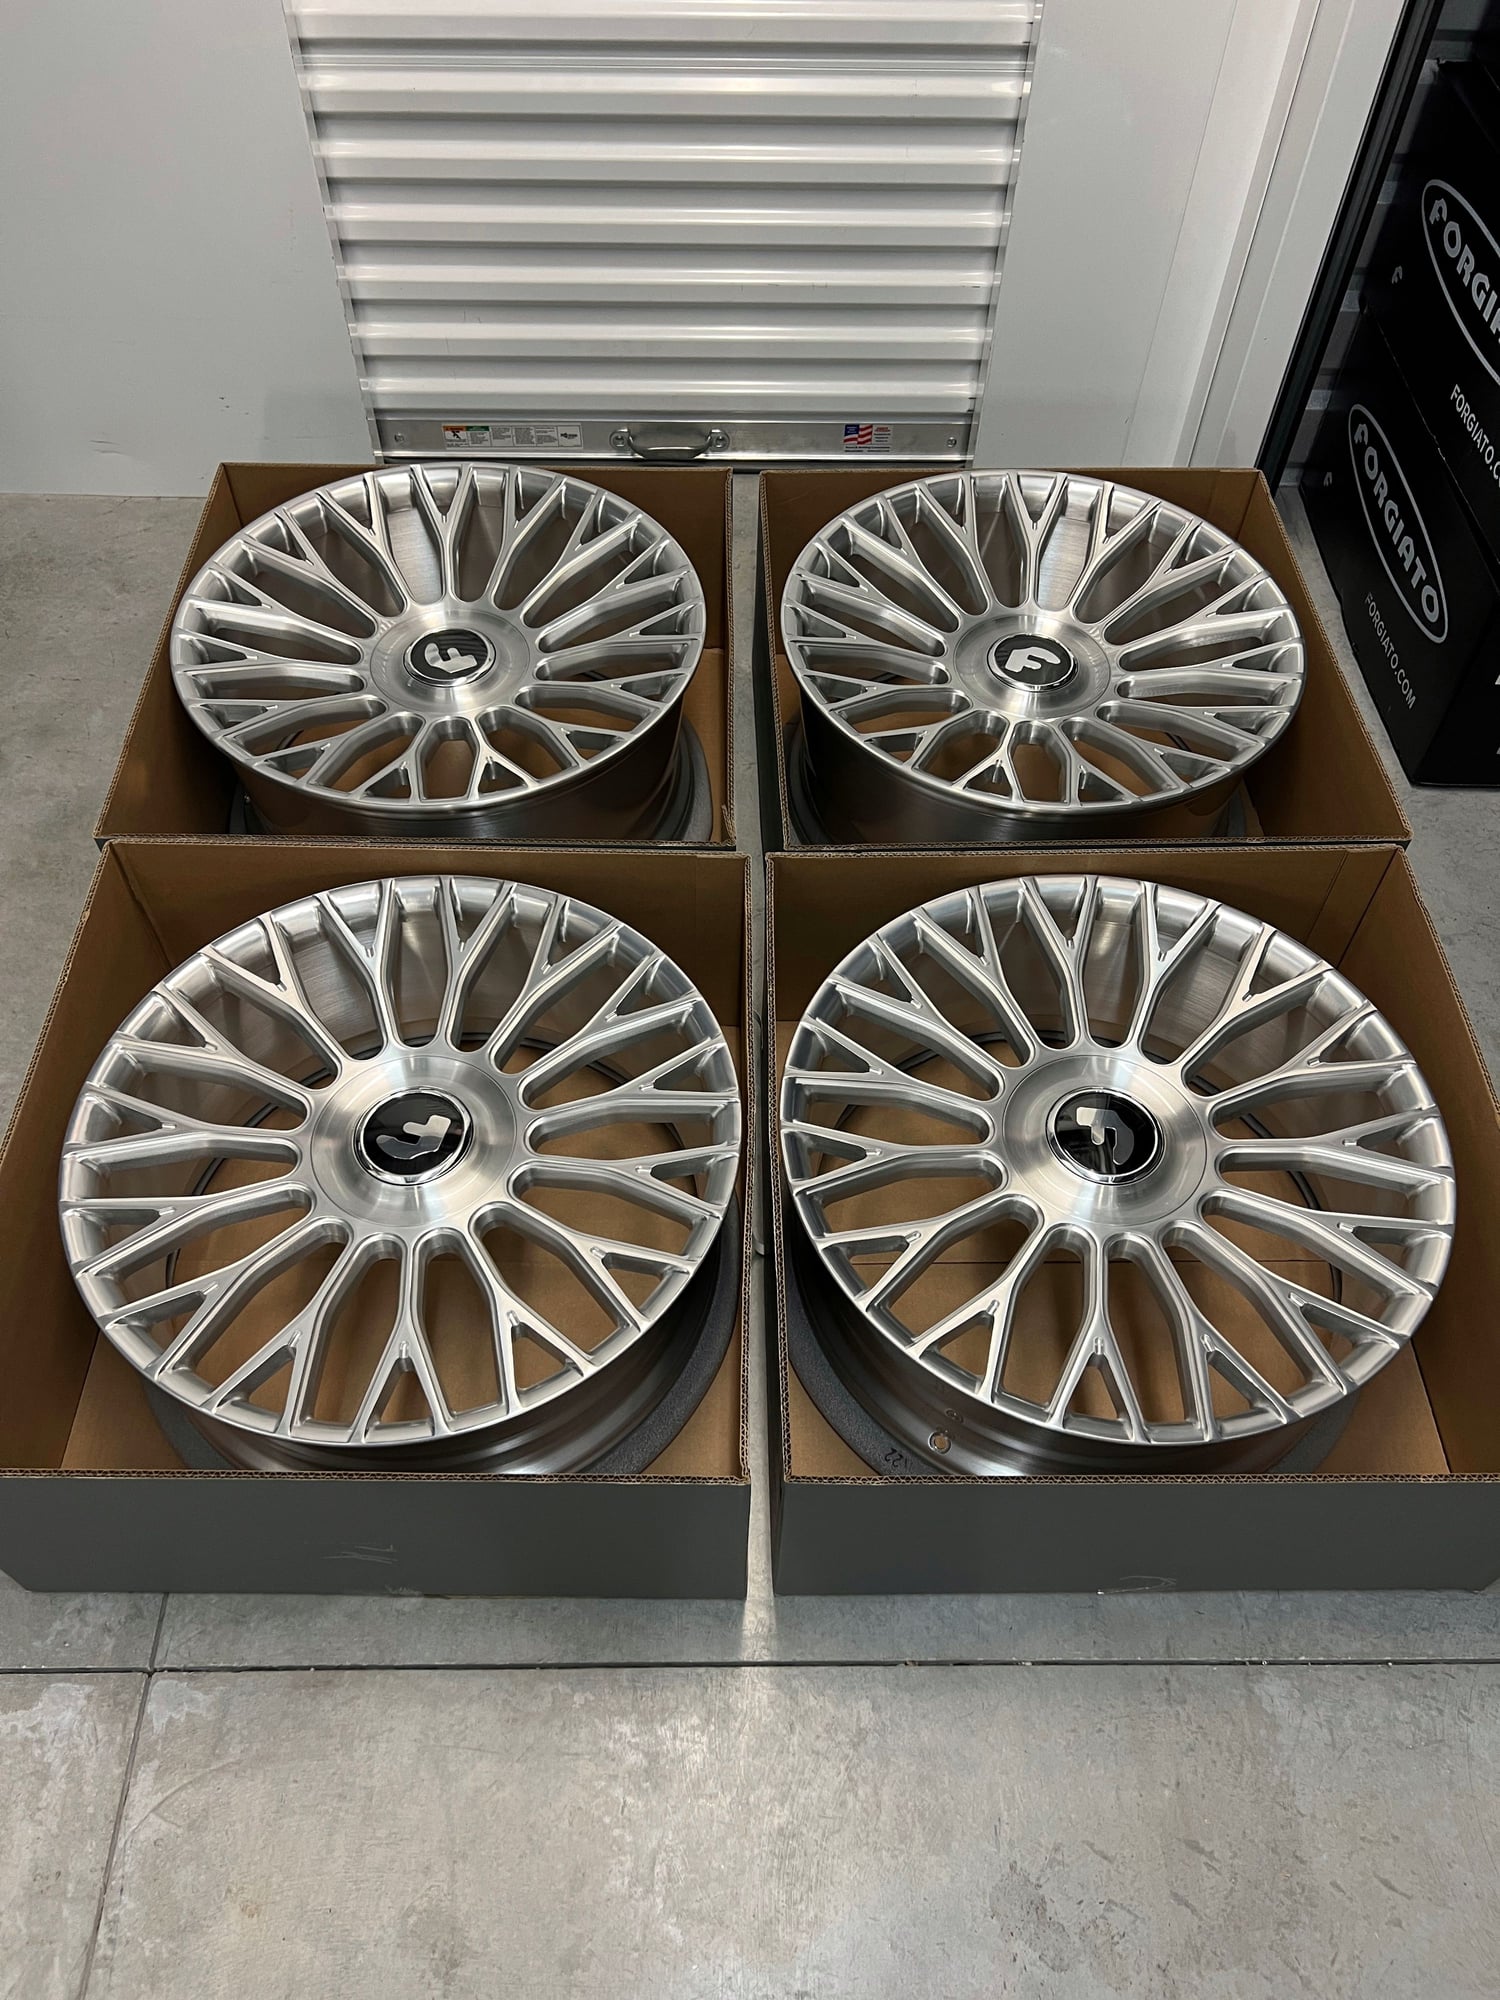 Wheels and Tires/Axles - For Sale: Brand New 22" Forgiato's for Mercedes S-Class (W222 &... - New - 2014 to 2025 Mercedes-Benz S-Class - Miami, FL 33155, United States